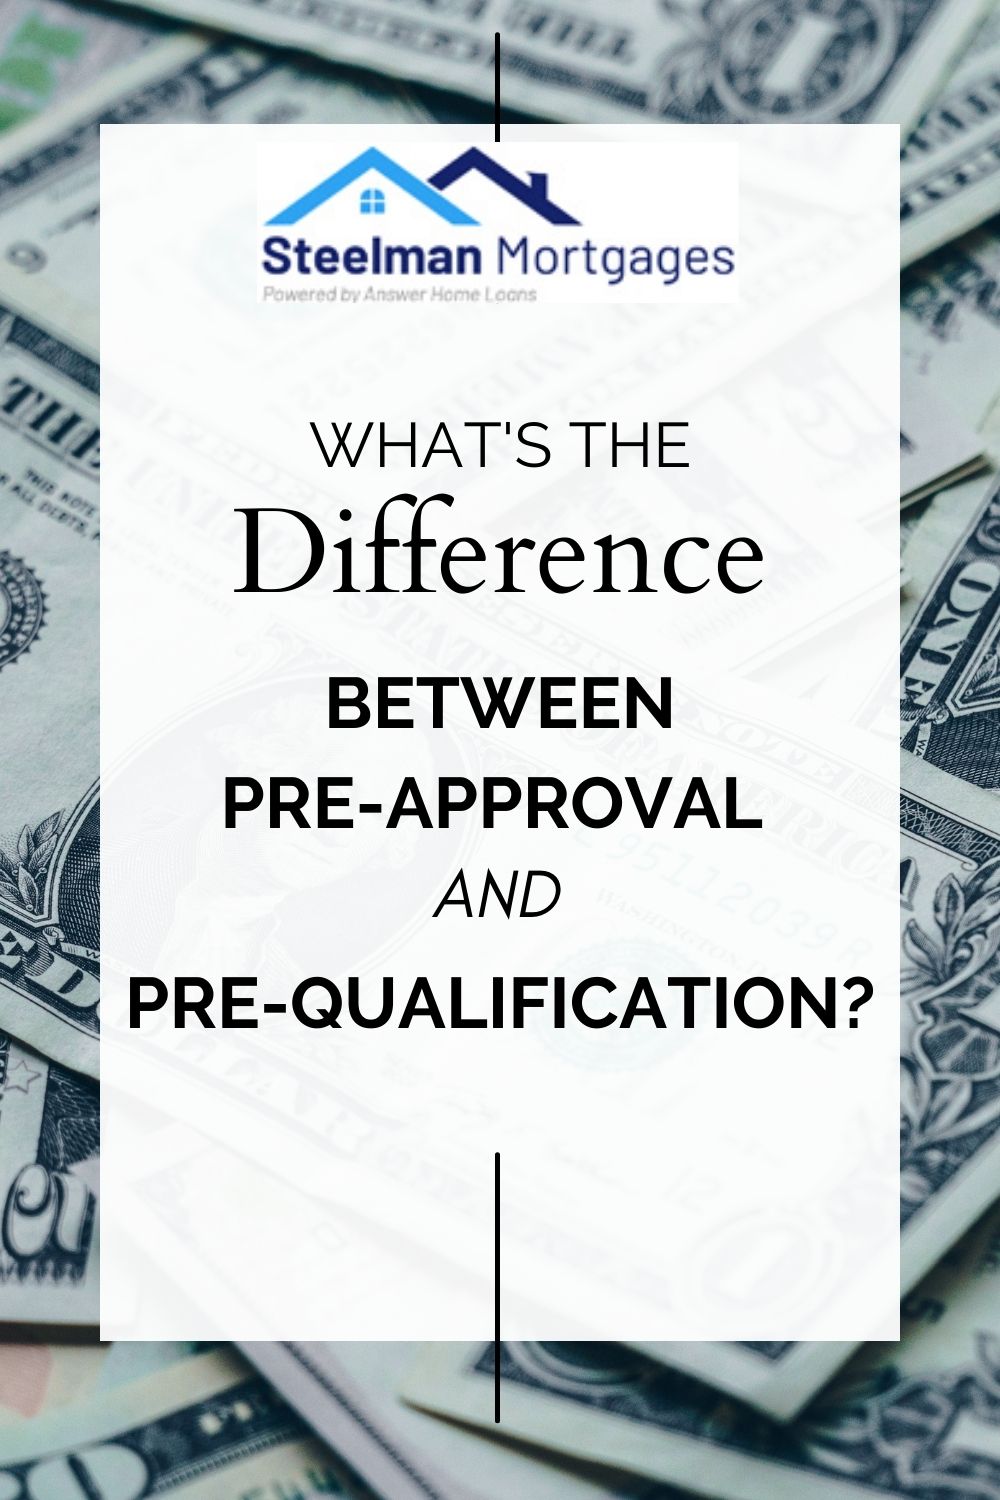 What's the Difference Between Pre-Approval and Pre-Qualification?